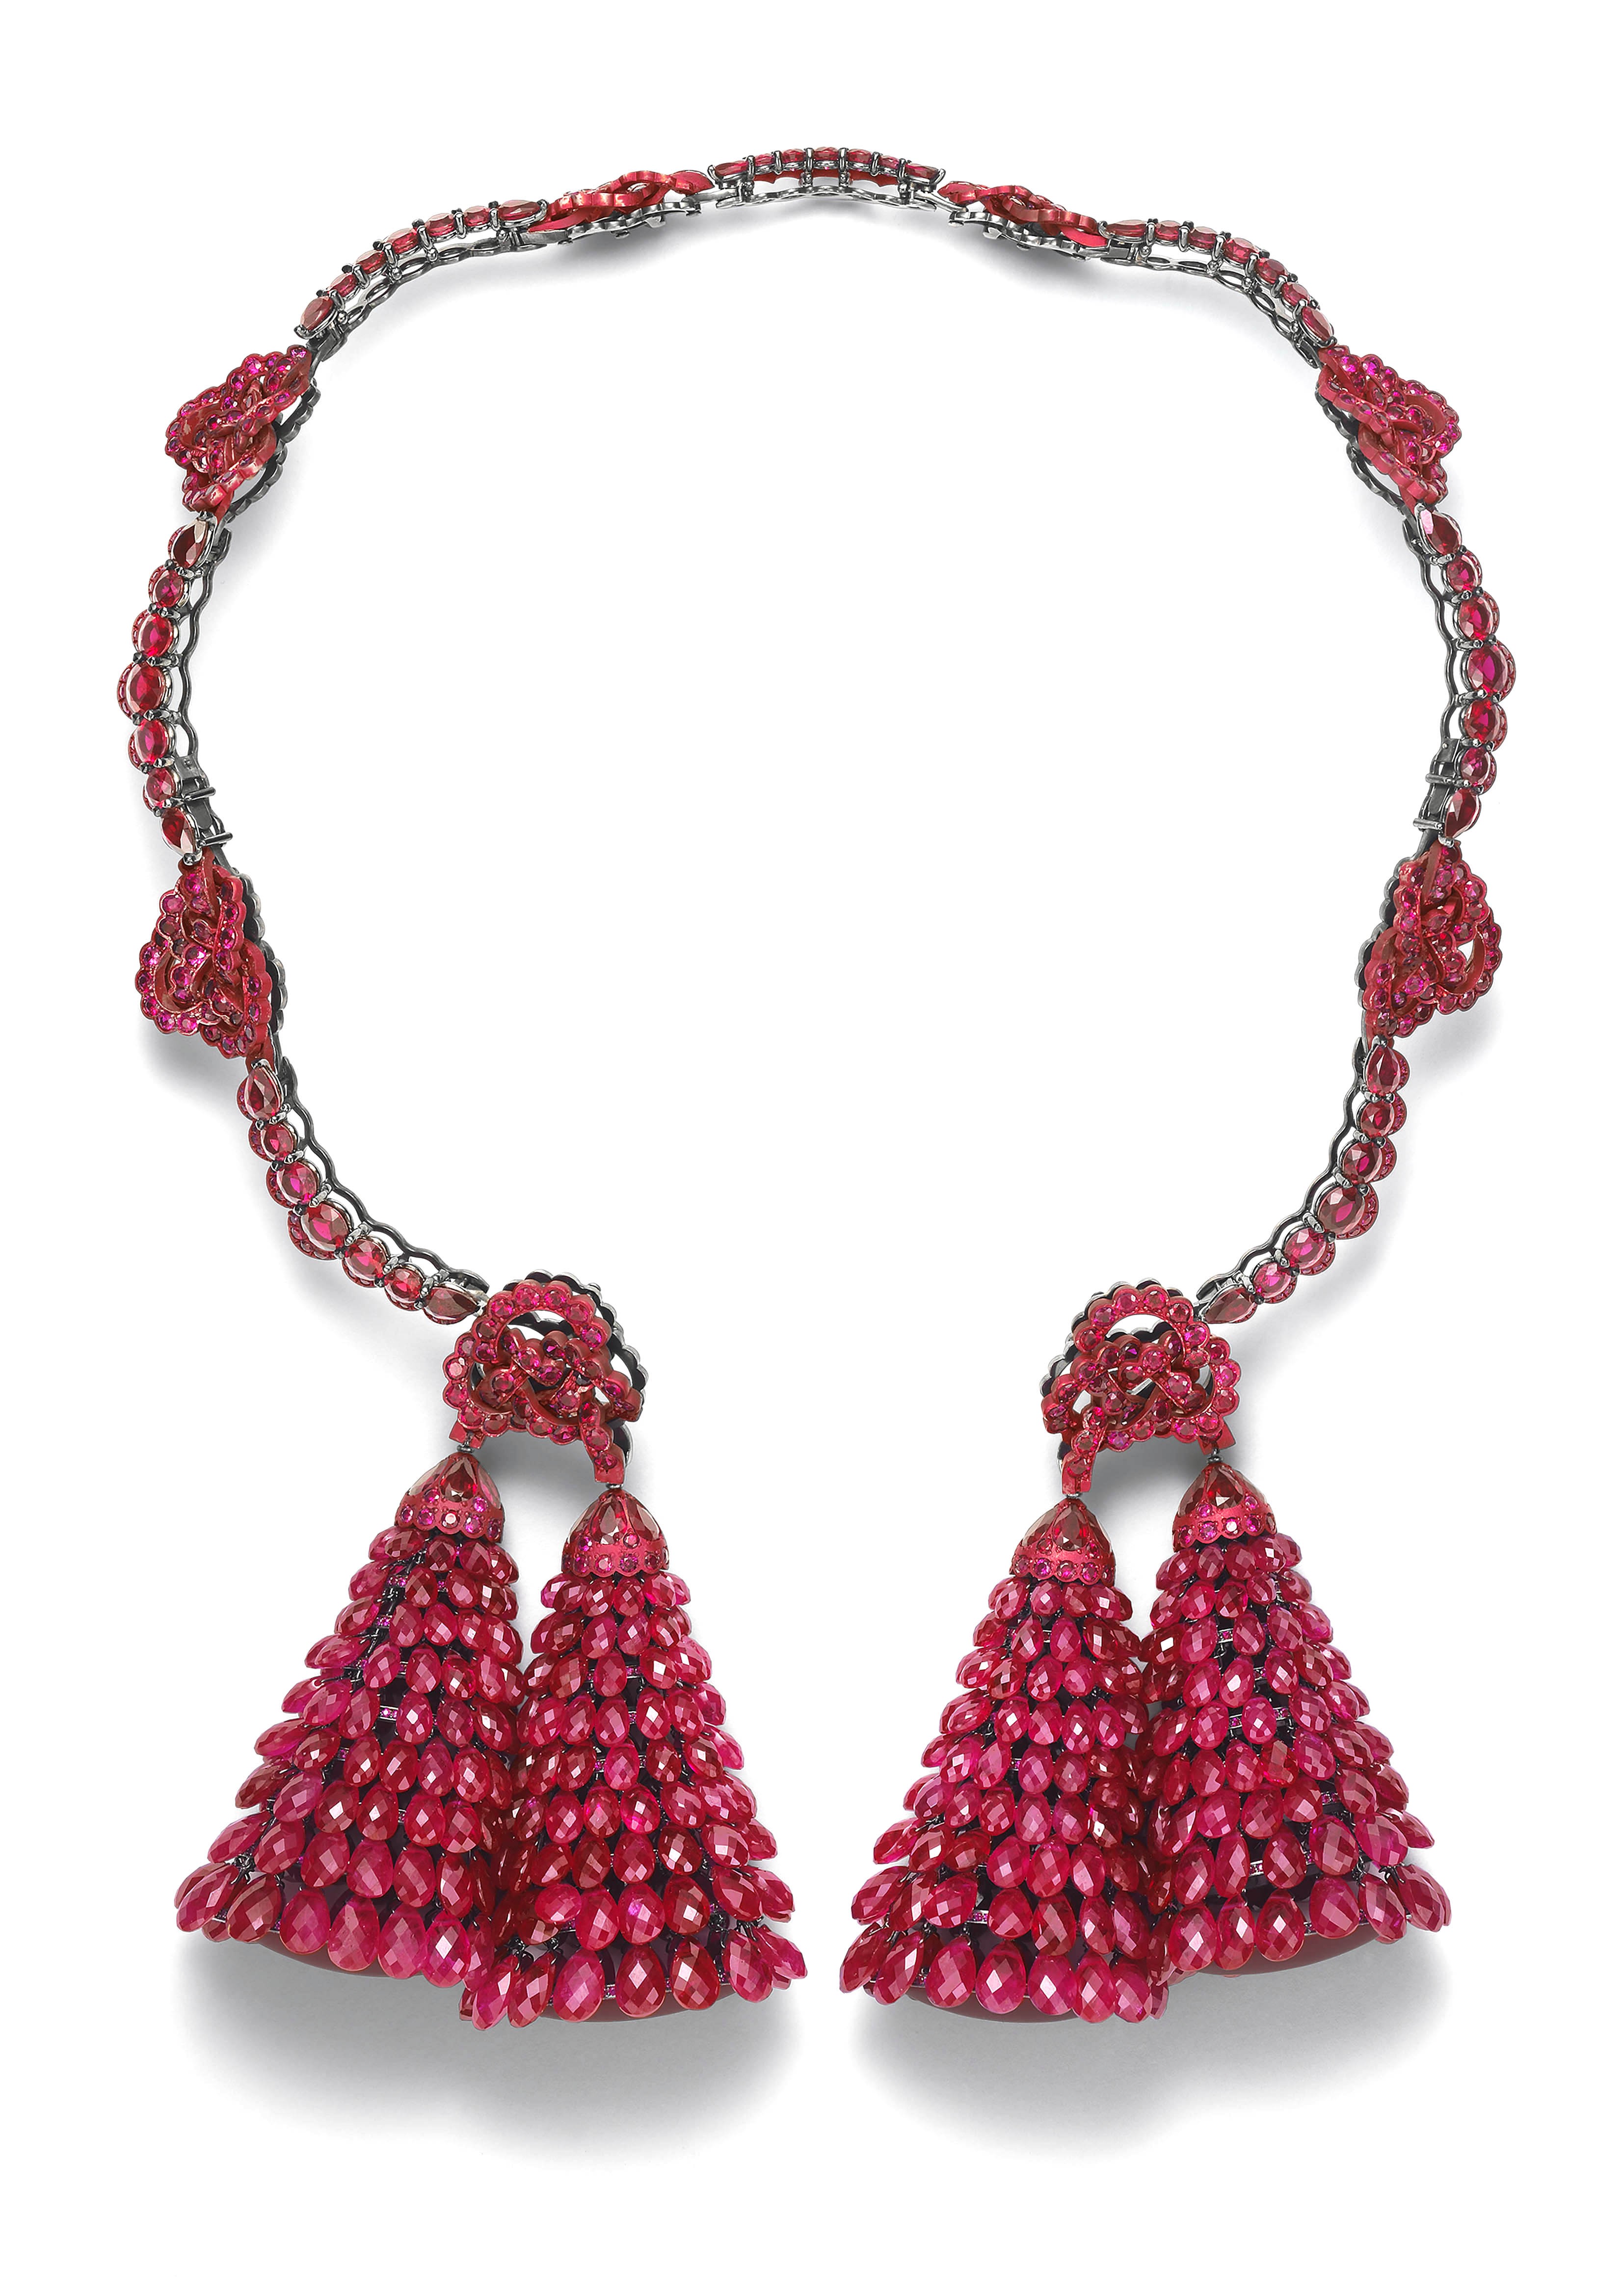 Chopard’s Chinese knot necklace